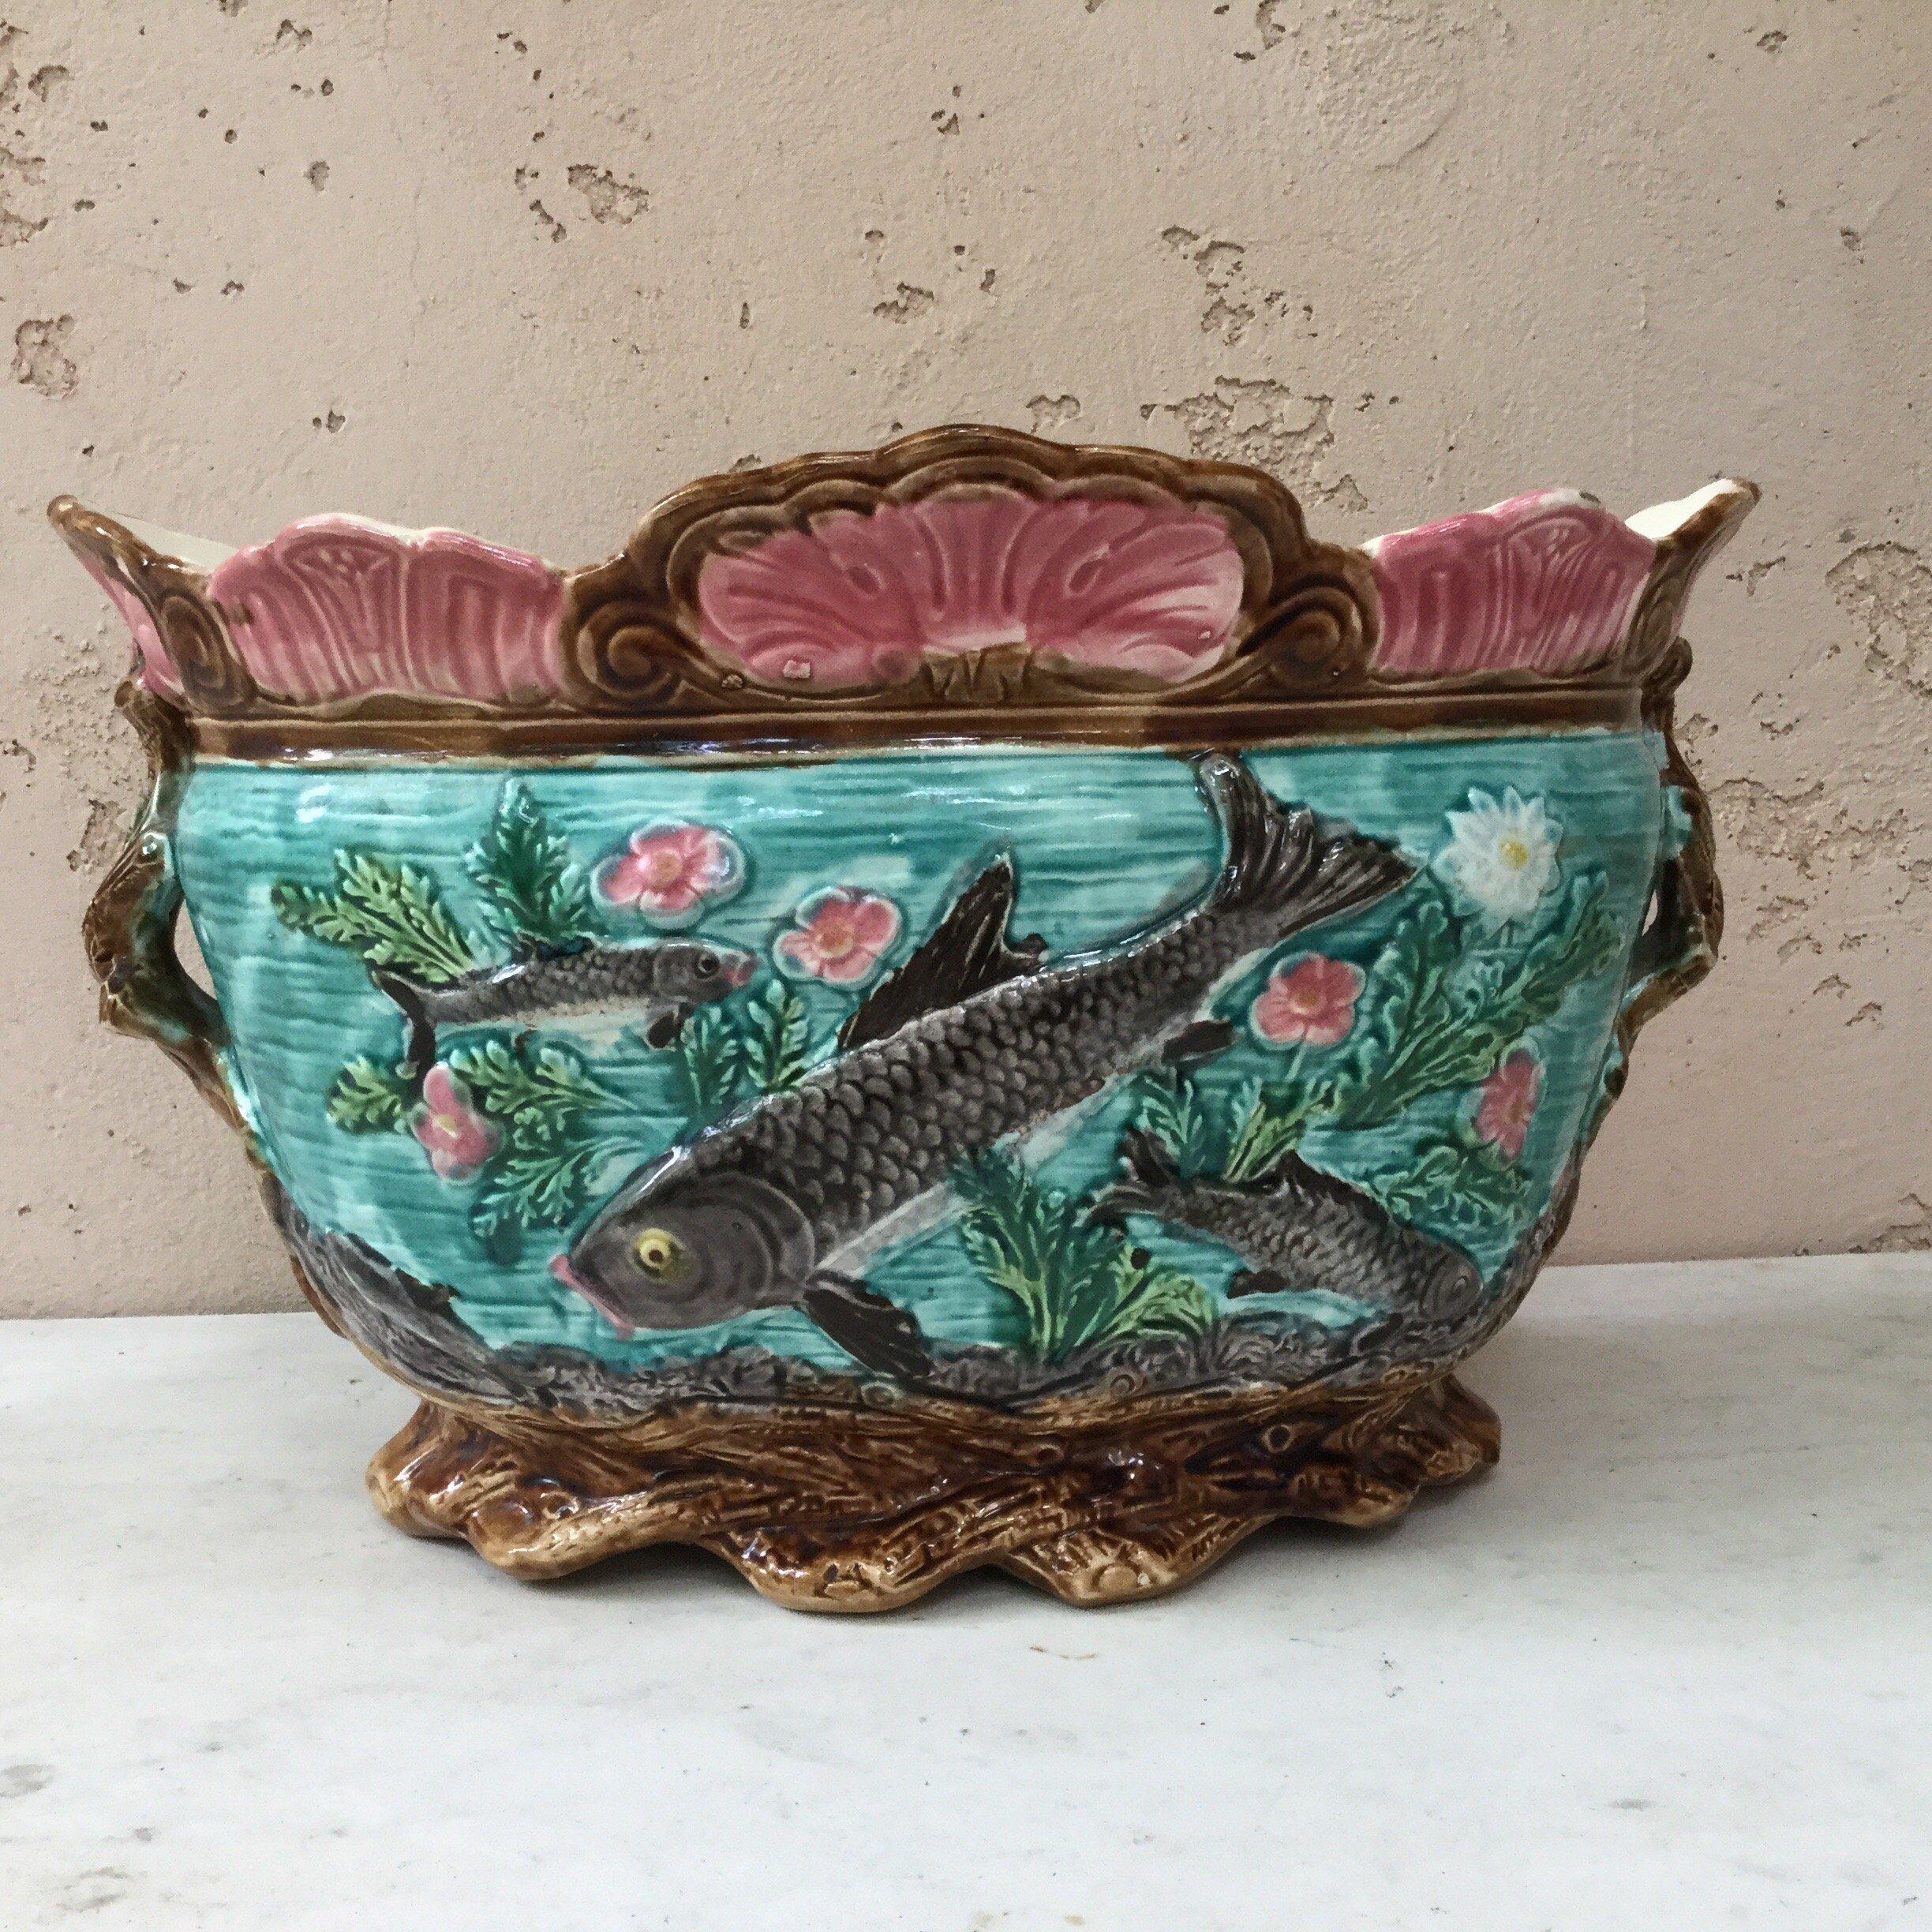 Inspired by the Japonism movement this French Majolica large jardinière is signed Onnaing, circa 1890.
This handled jardinière is decorated with fishes in the water surrounded by seaweeds, the handles and feets are brown branches.